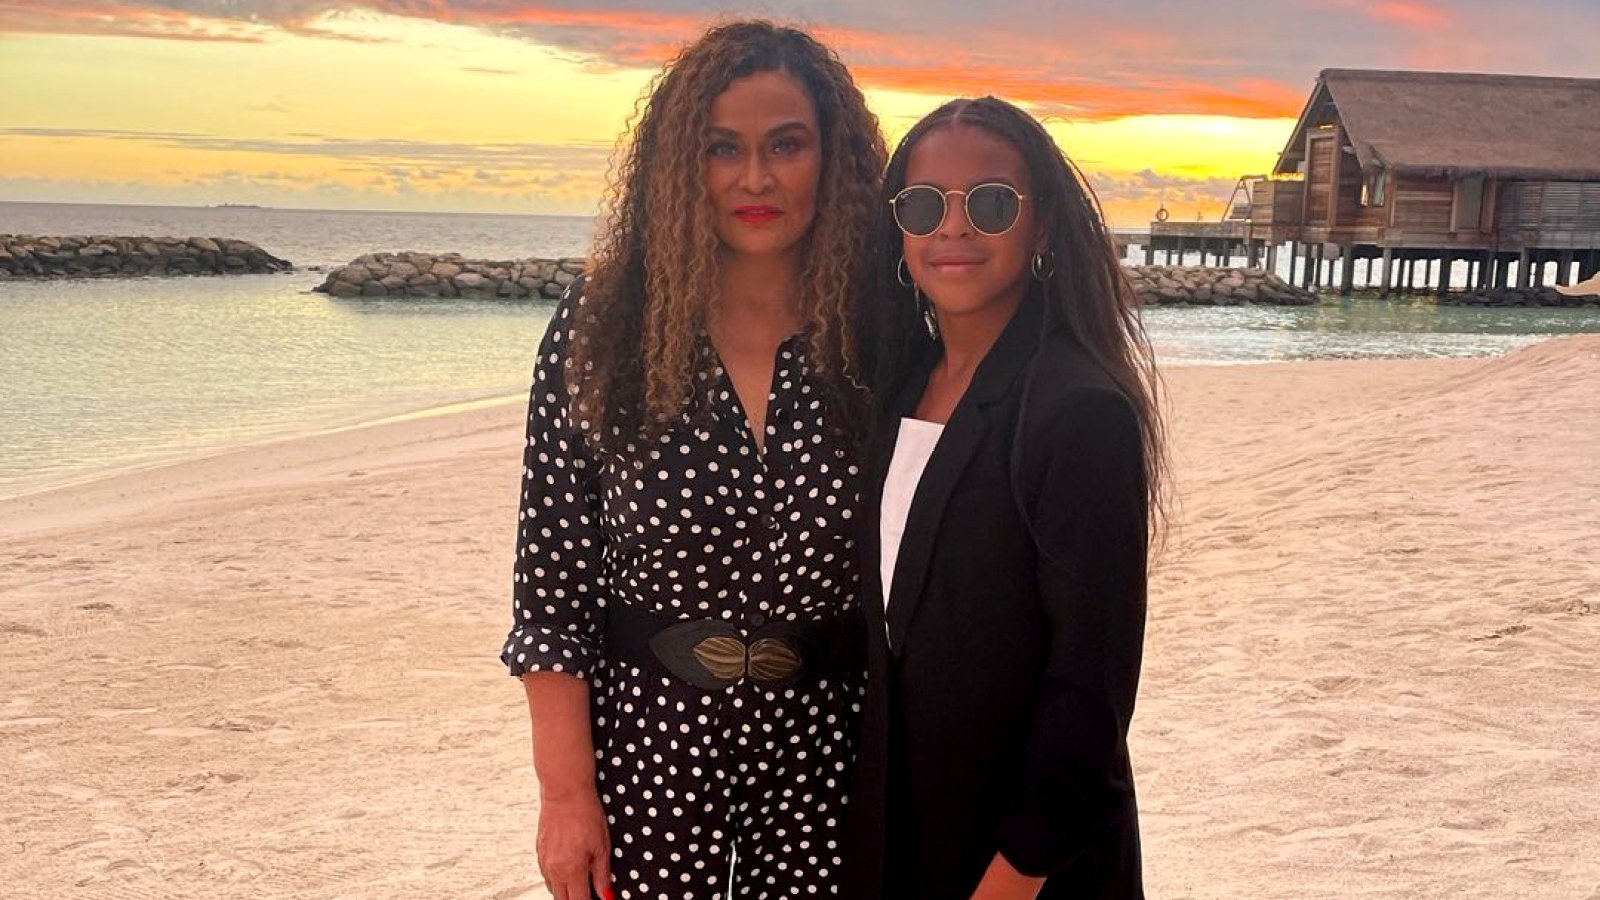 Beyonce’s Mom Tina Knowles Lawson Shares Video of Blue Ivy Doing Her Makeup: ‘Never Ceases to Amaze Me’